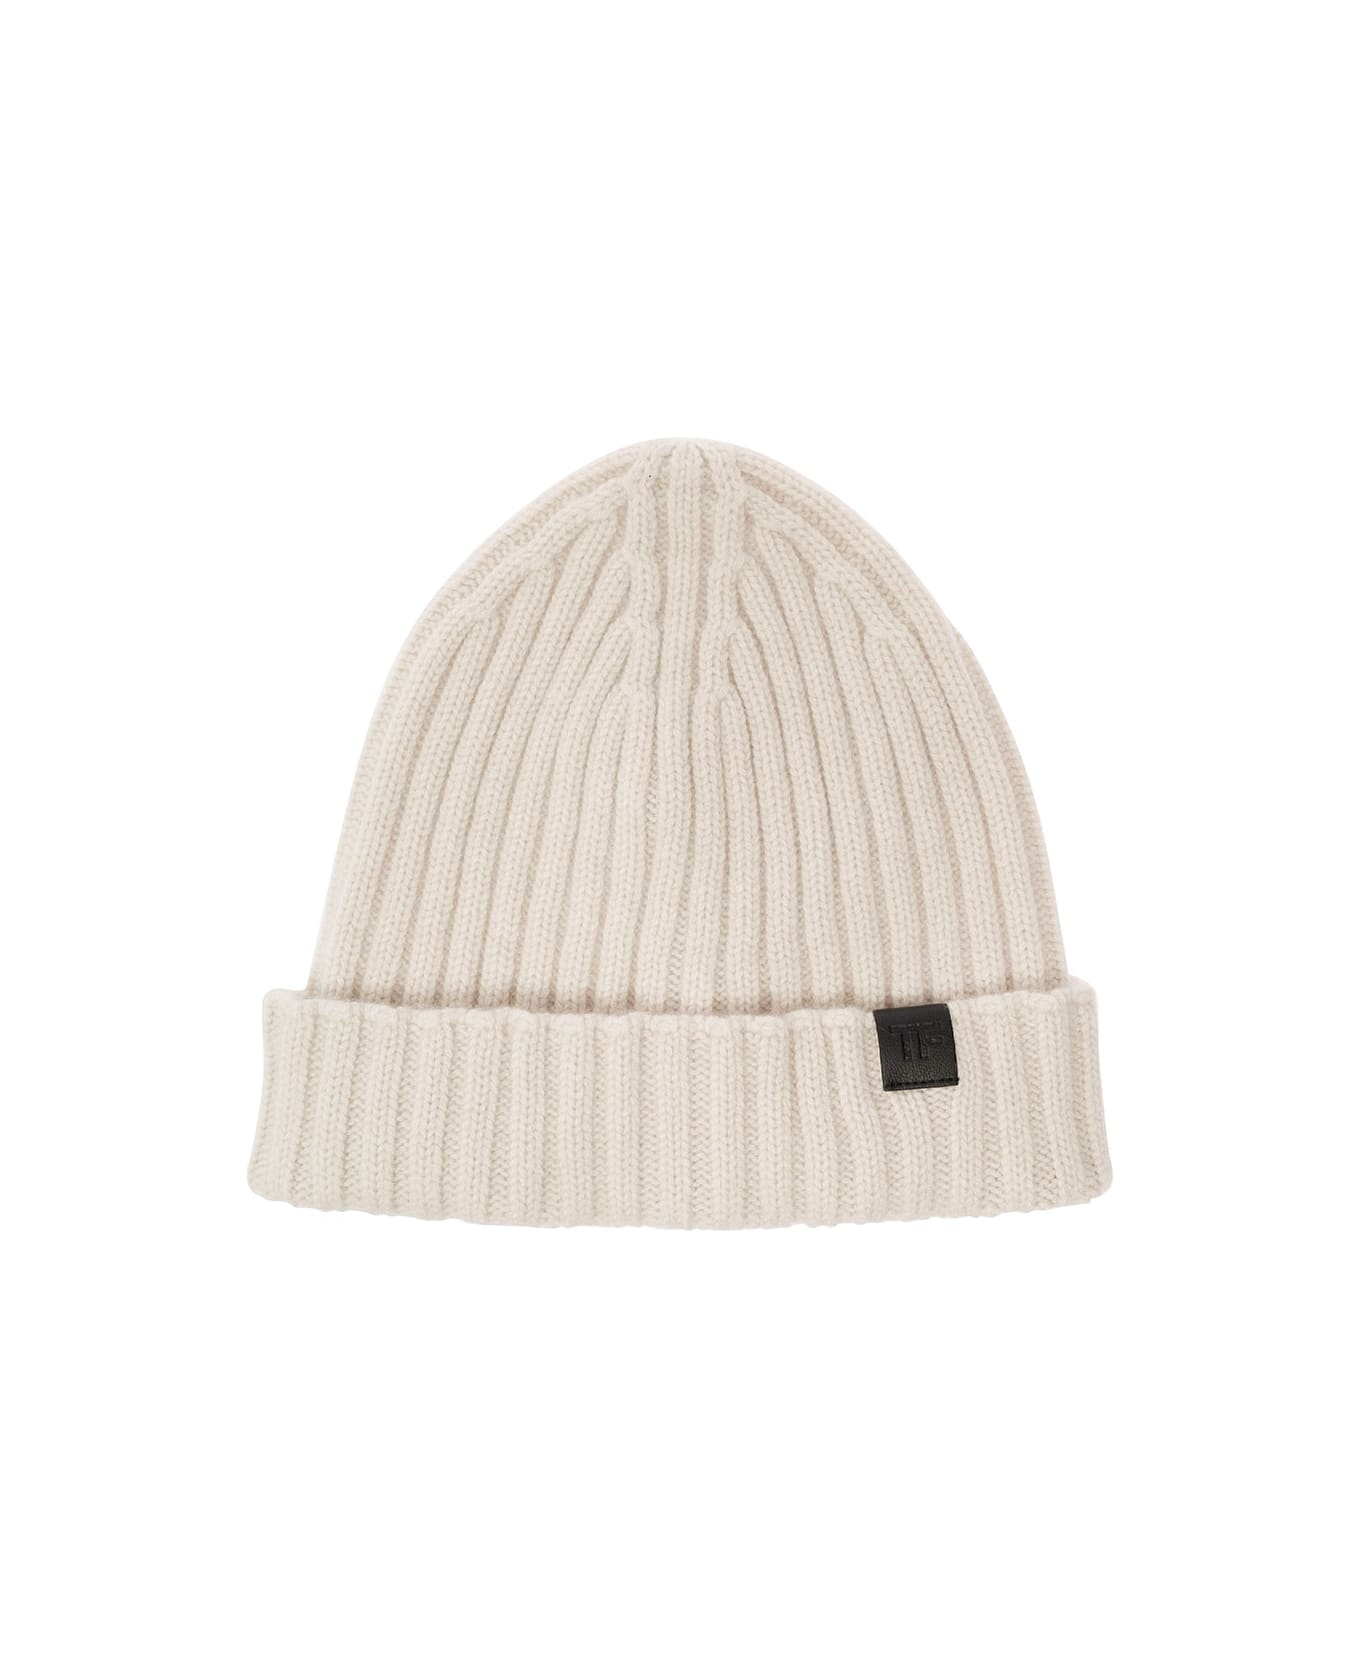 Tom Ford White Ribbed Beanie With Logo Patch In Cashmere Man - White 帽子